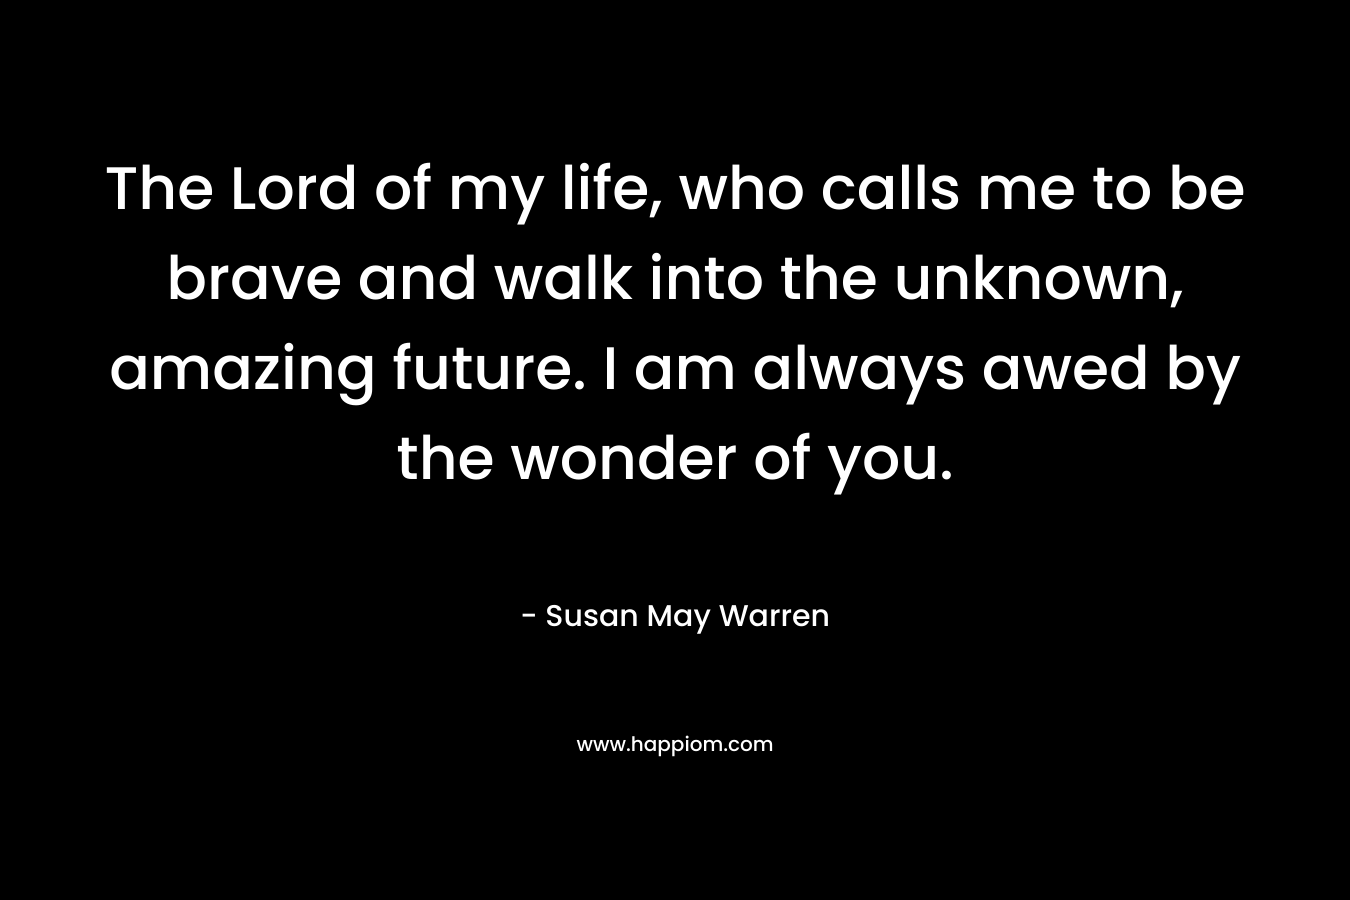 The Lord of my life, who calls me to be brave and walk into the unknown, amazing future. I am always awed by the wonder of you.